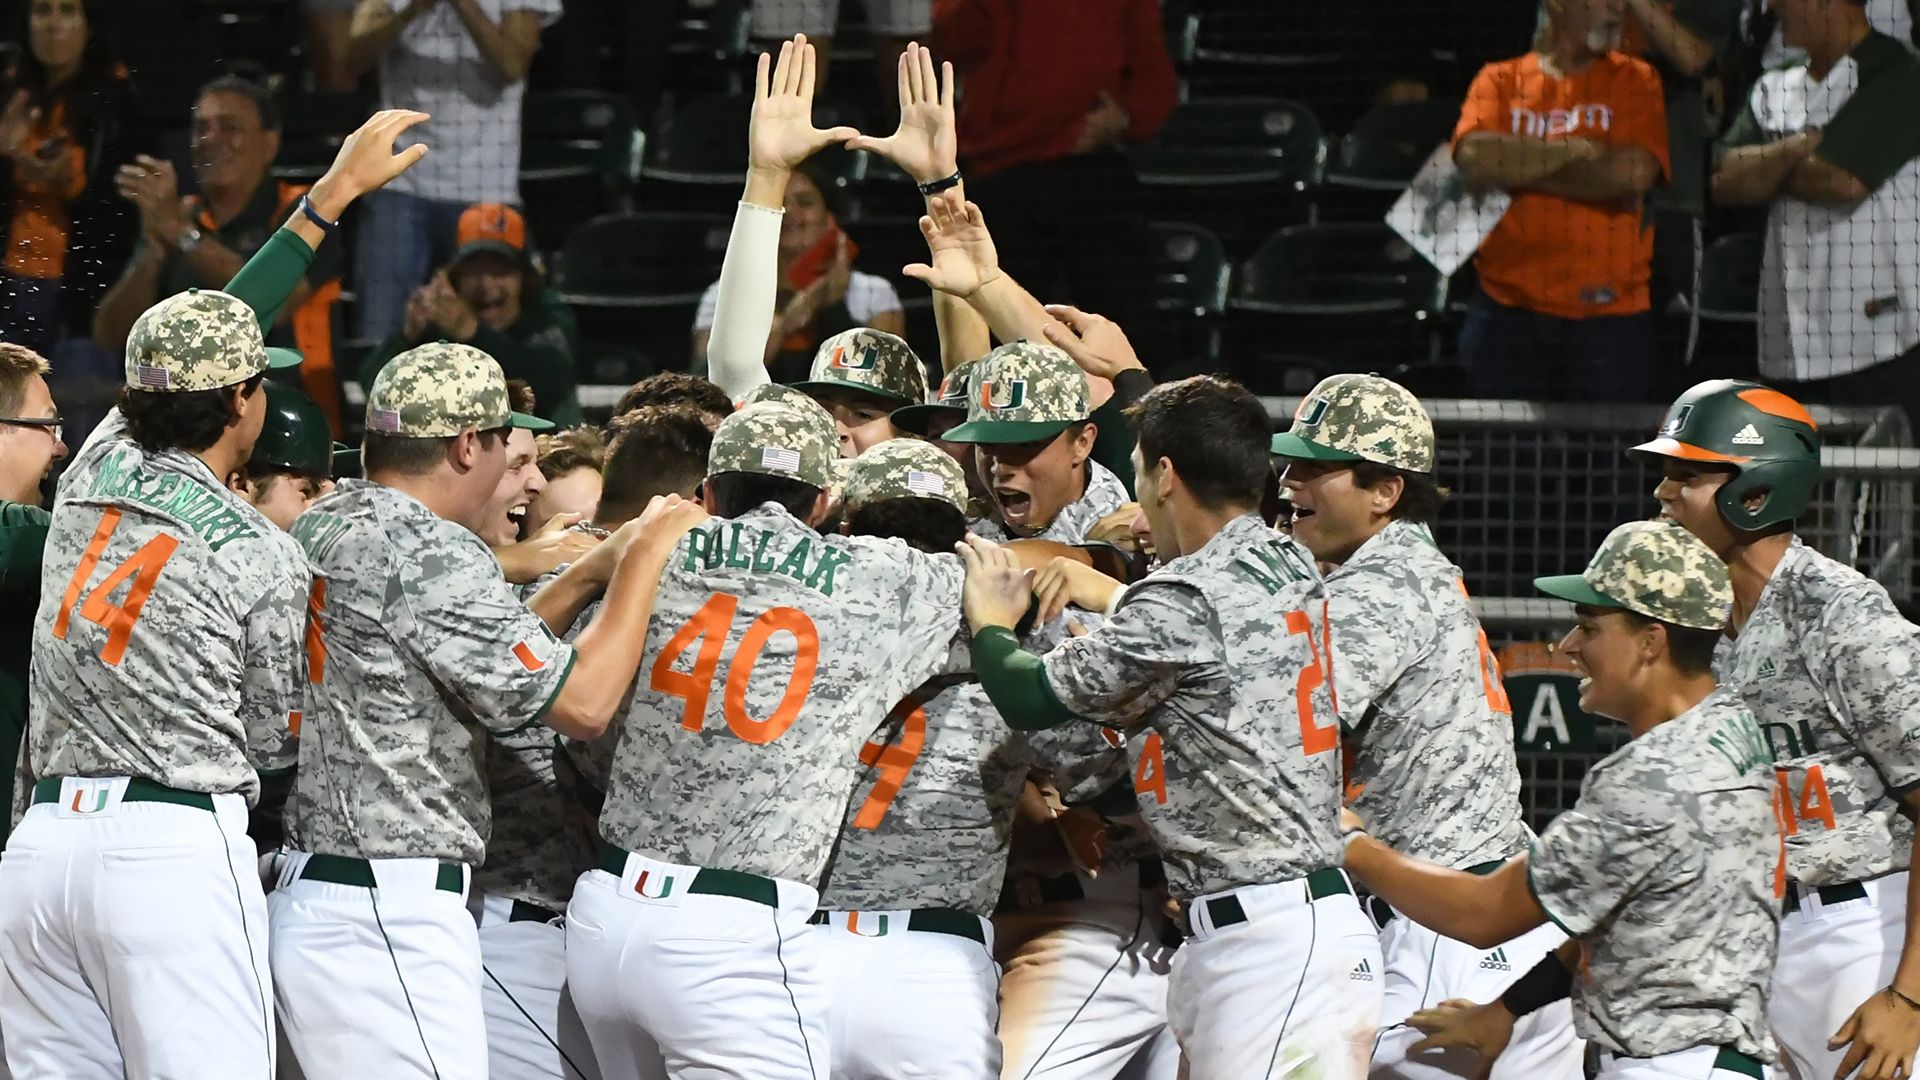 Canes Ranked No. 7 in Perfect Game Preseason Poll